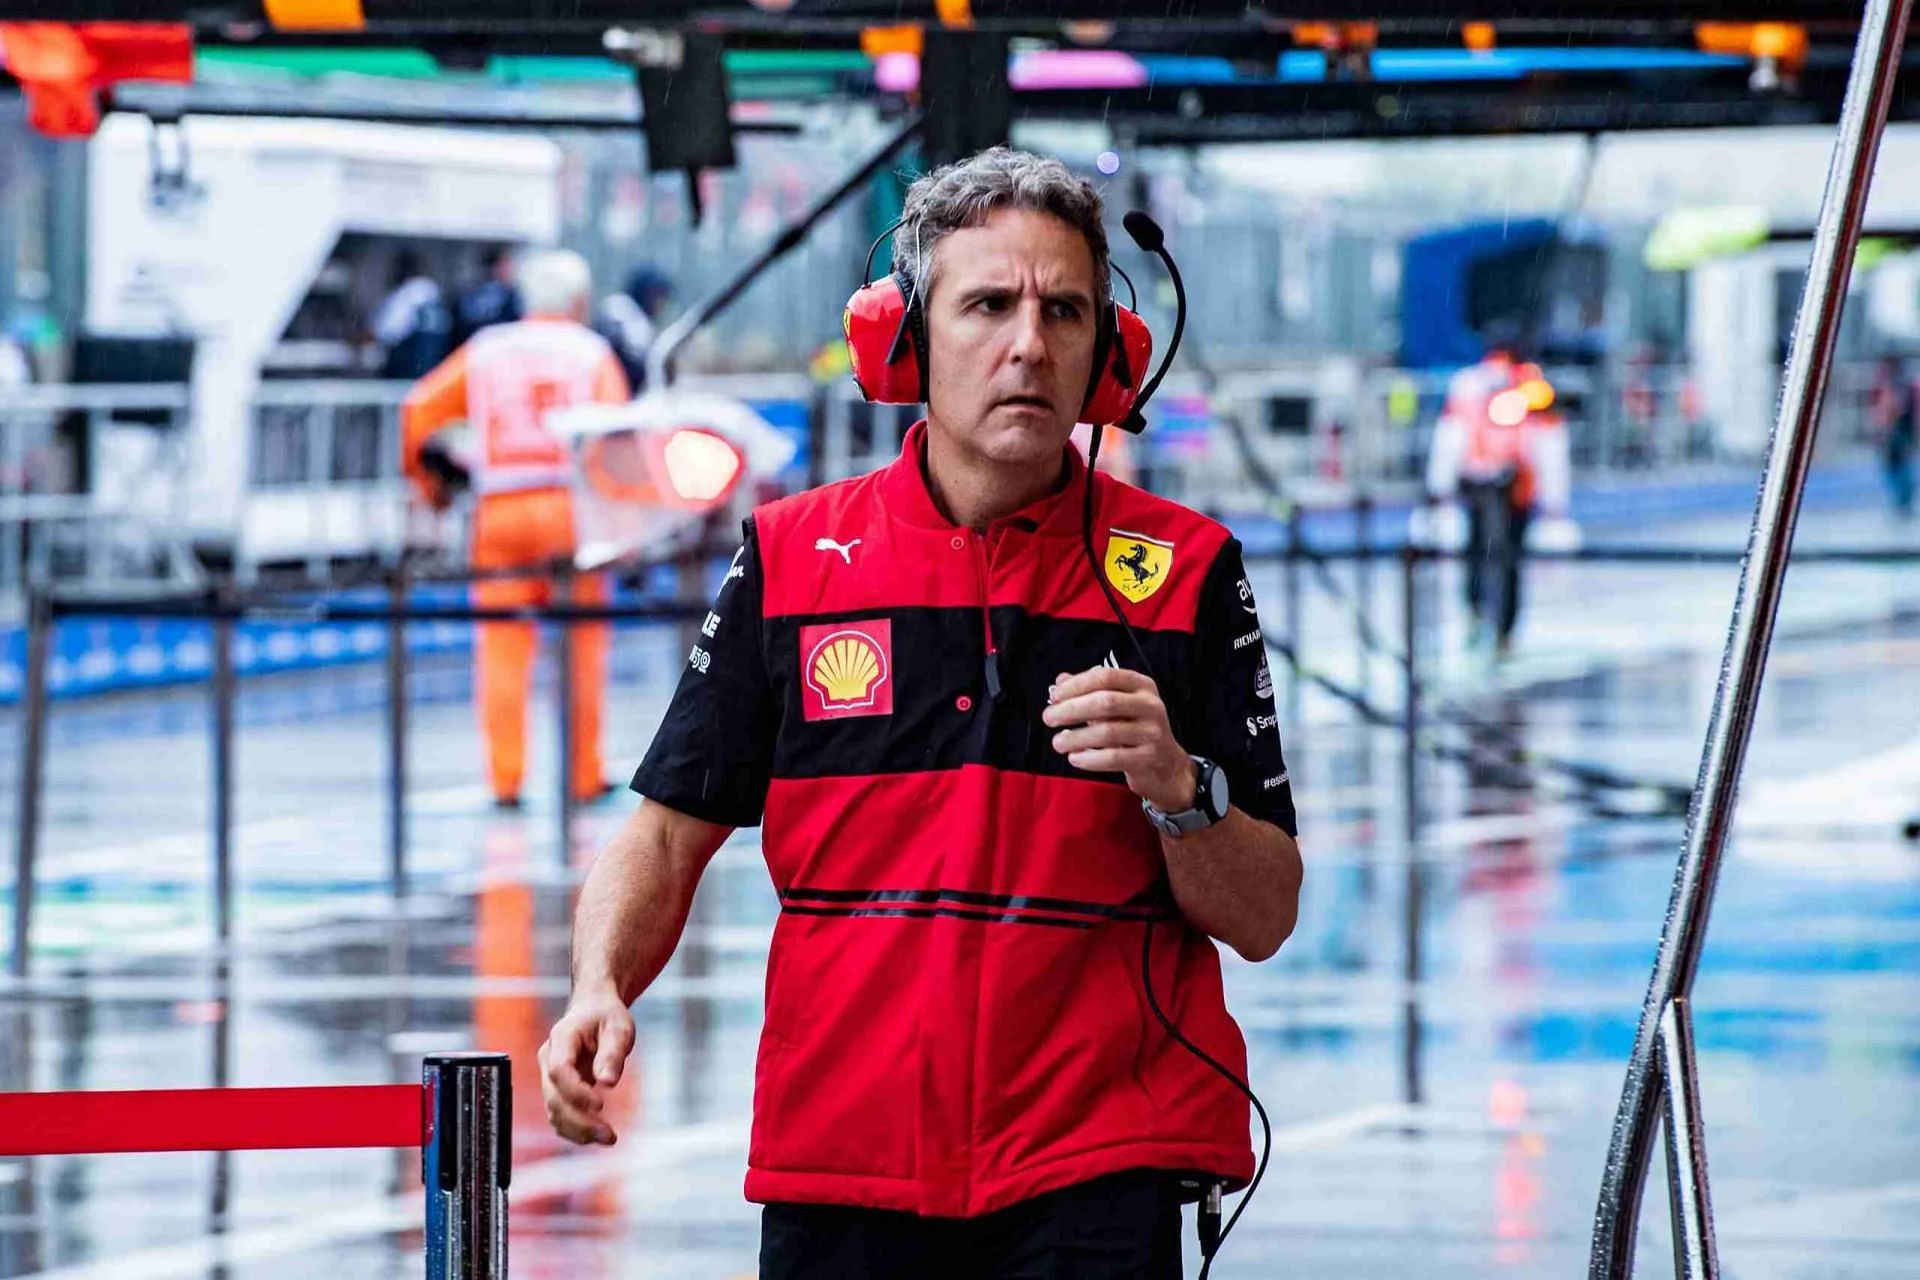 "Ferrari getting serious, the grid is finished" Fans react to the